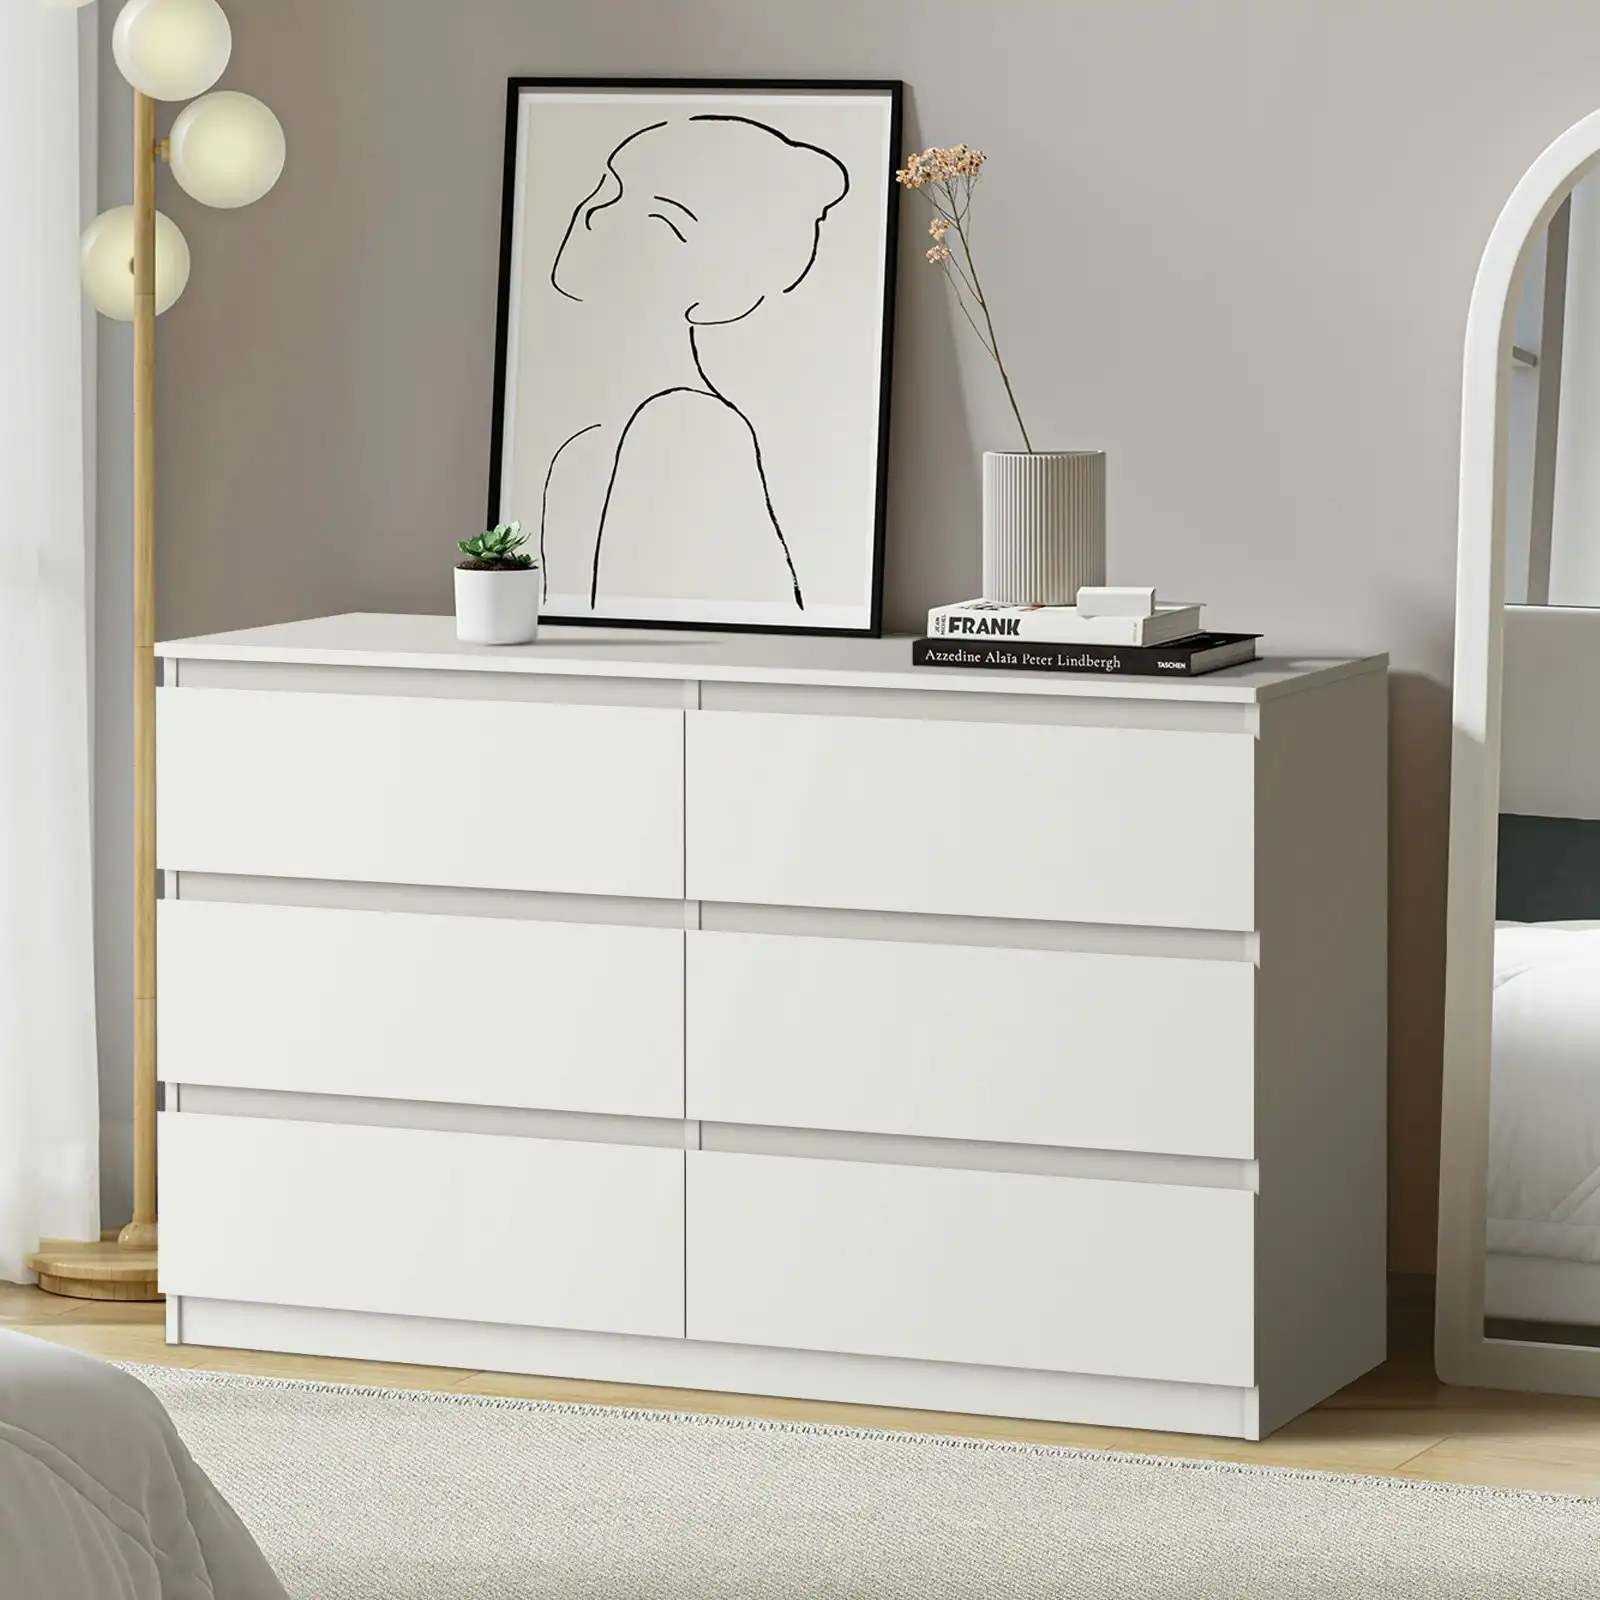 Oikiture 6 Chest of Drawers Lowboy Storage Cabinet Dresser Table Bedroom White